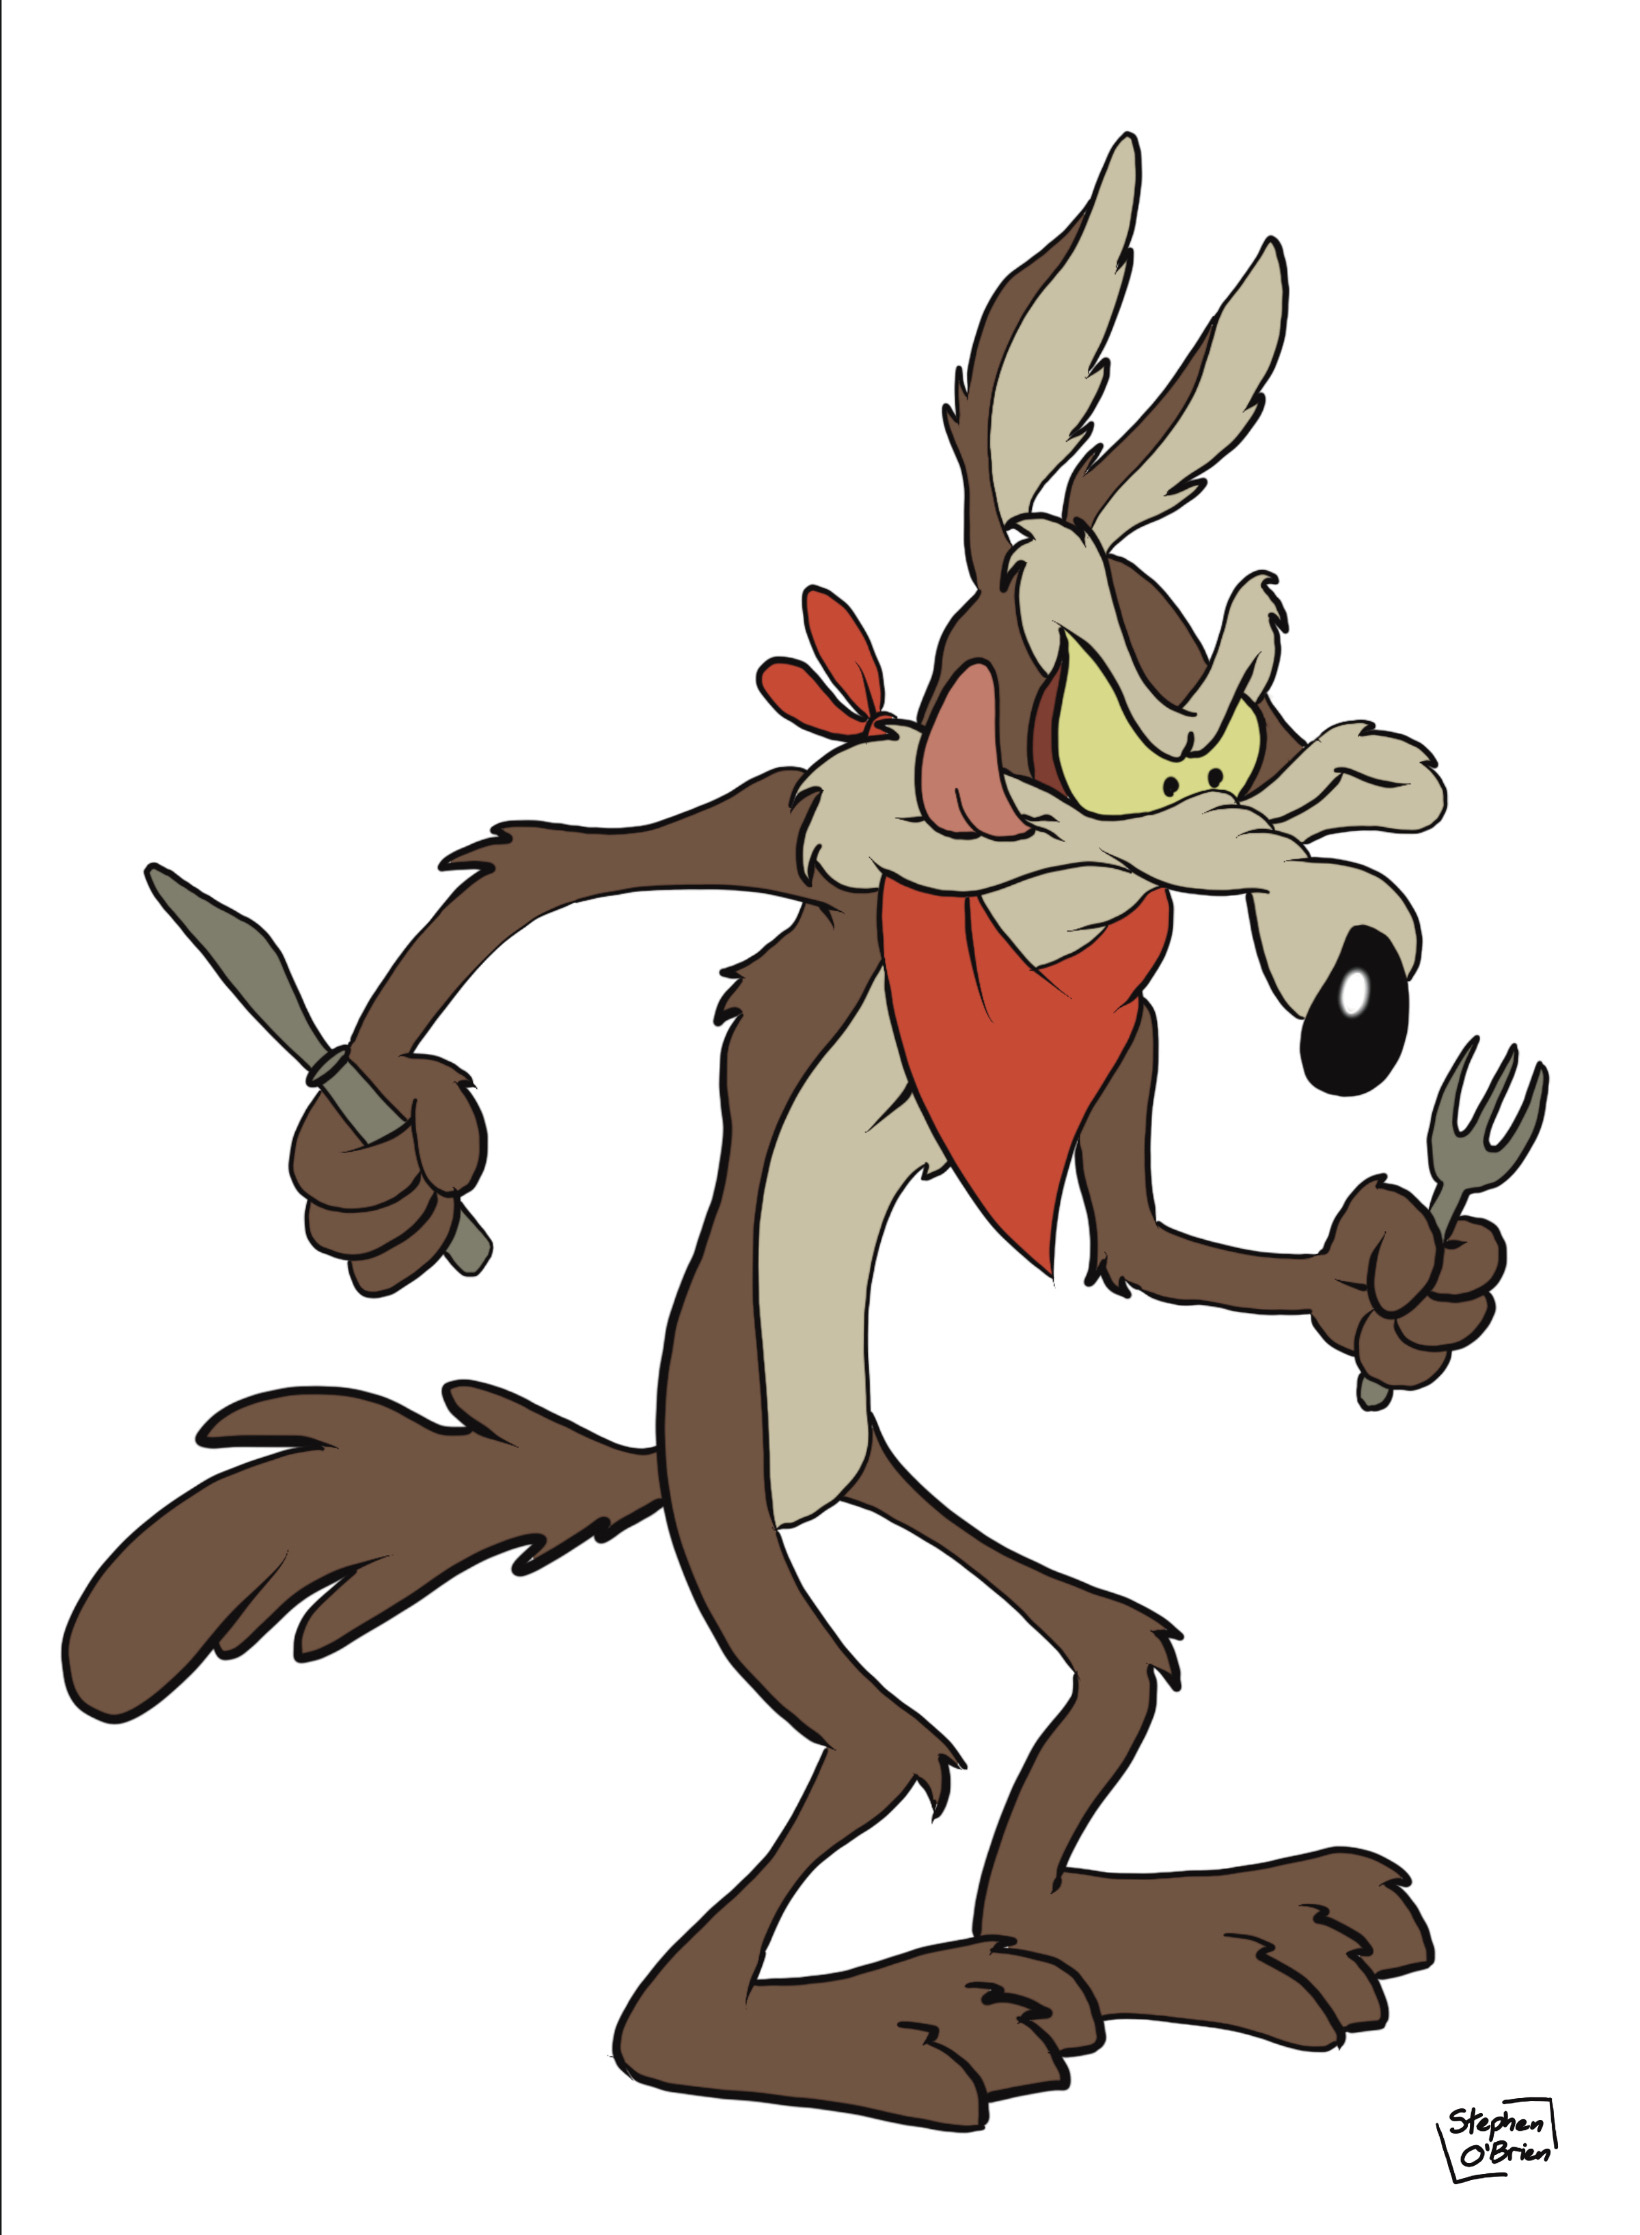 Wile E. Coyote. by StephenOBrien666 on DeviantArt